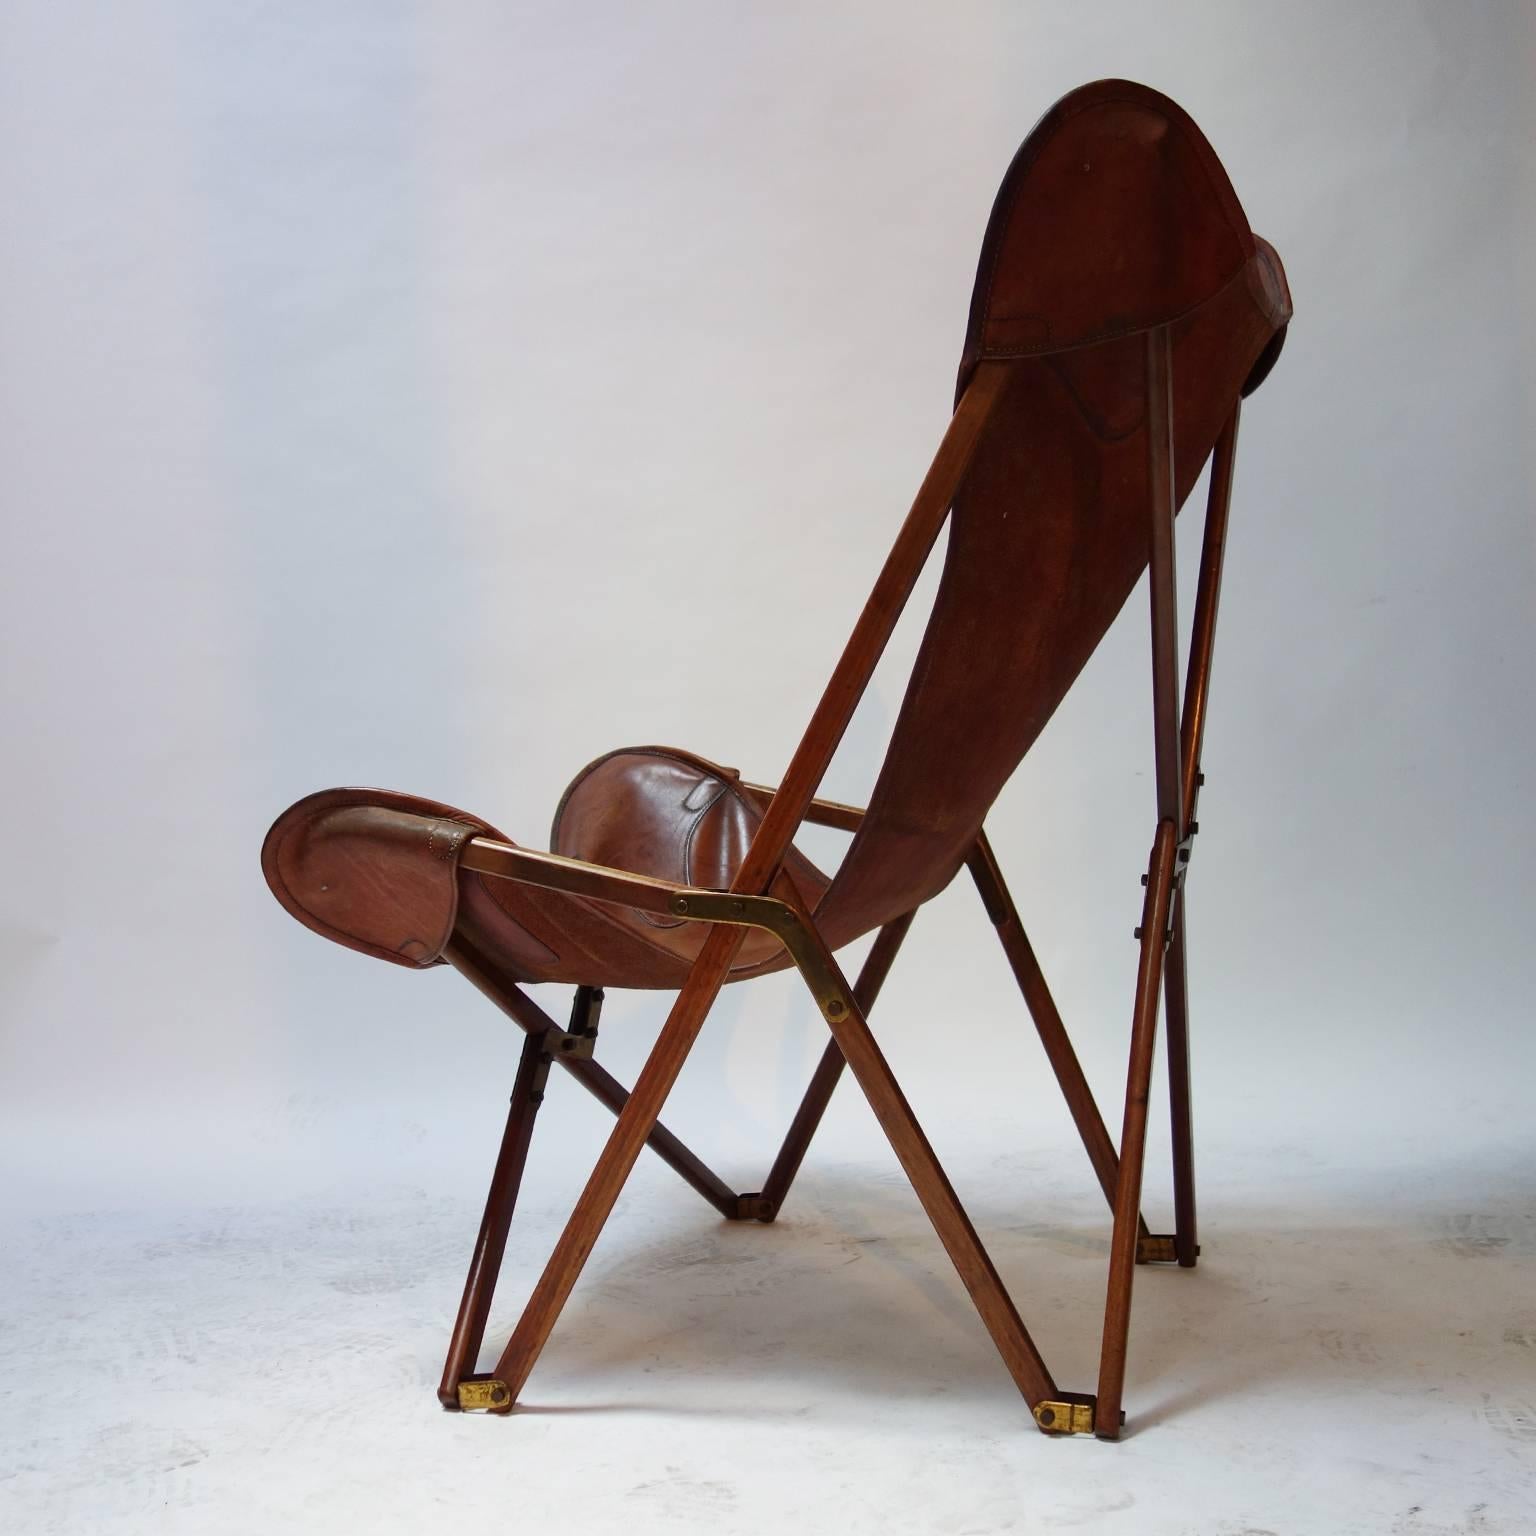 'Tripolina' folding chair designed by Joseph Beverly Fenby.

The Tripolina chair was made from prior to WWII by the firm of Viganò in Tripoli, Libya, for the expatriate Italian market as a camping chair of great stability in the sand and made